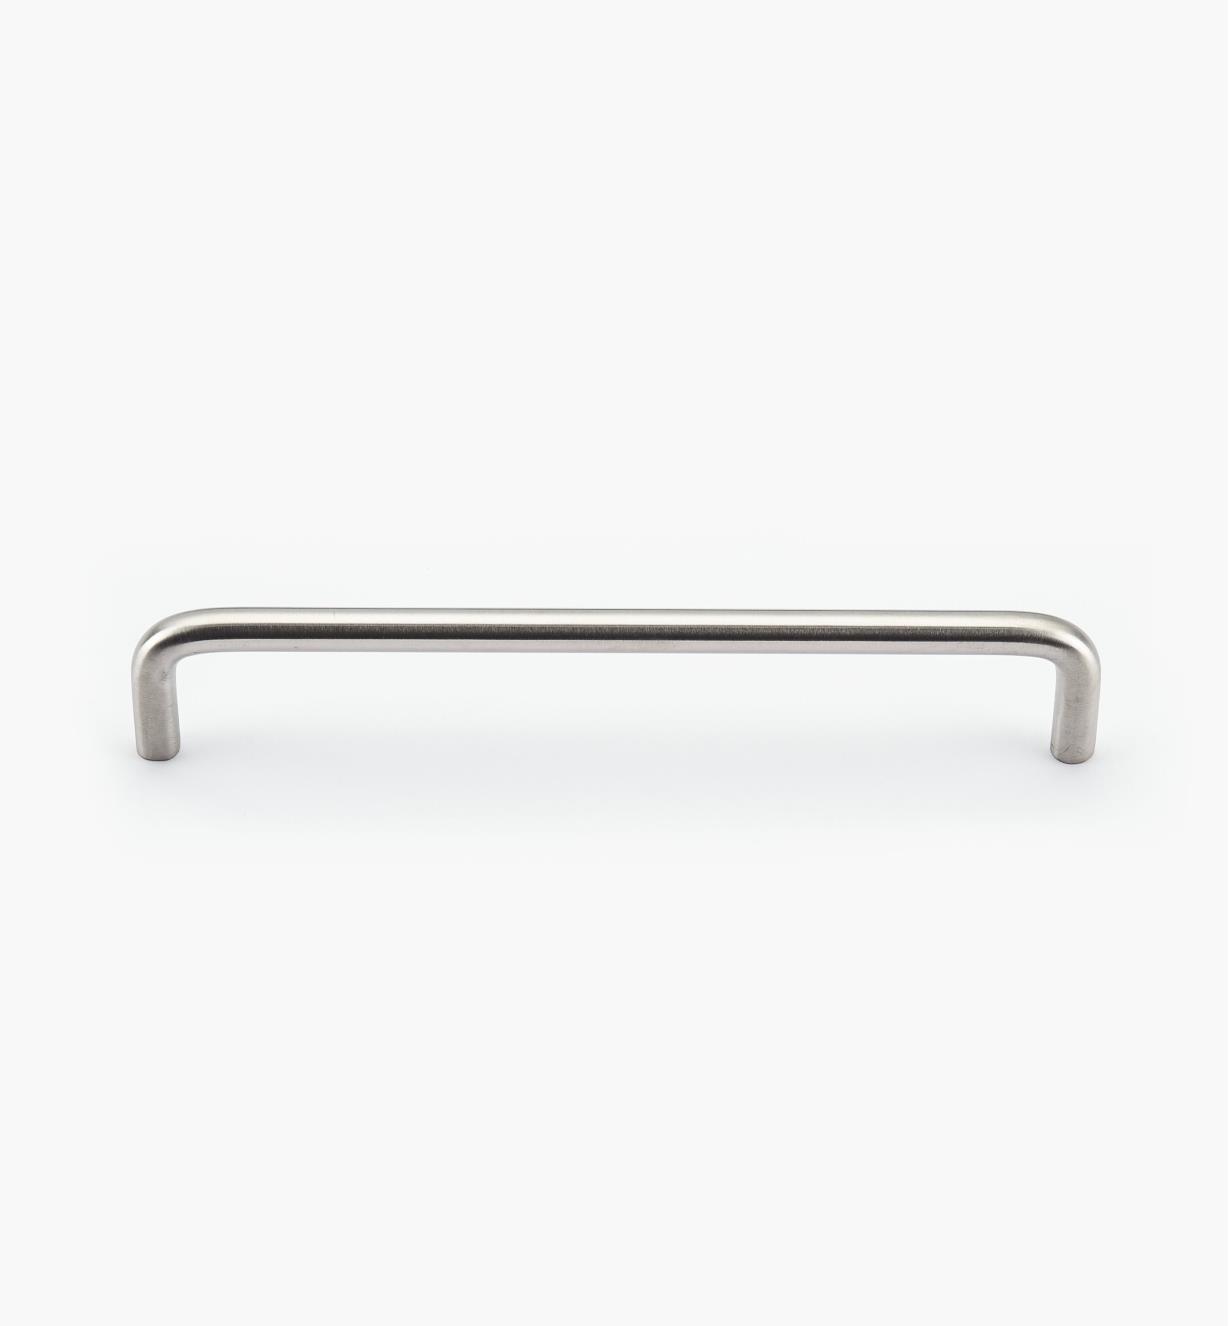 01W6807 - 8mm x 160mm Stainless-Steel Wire Pull